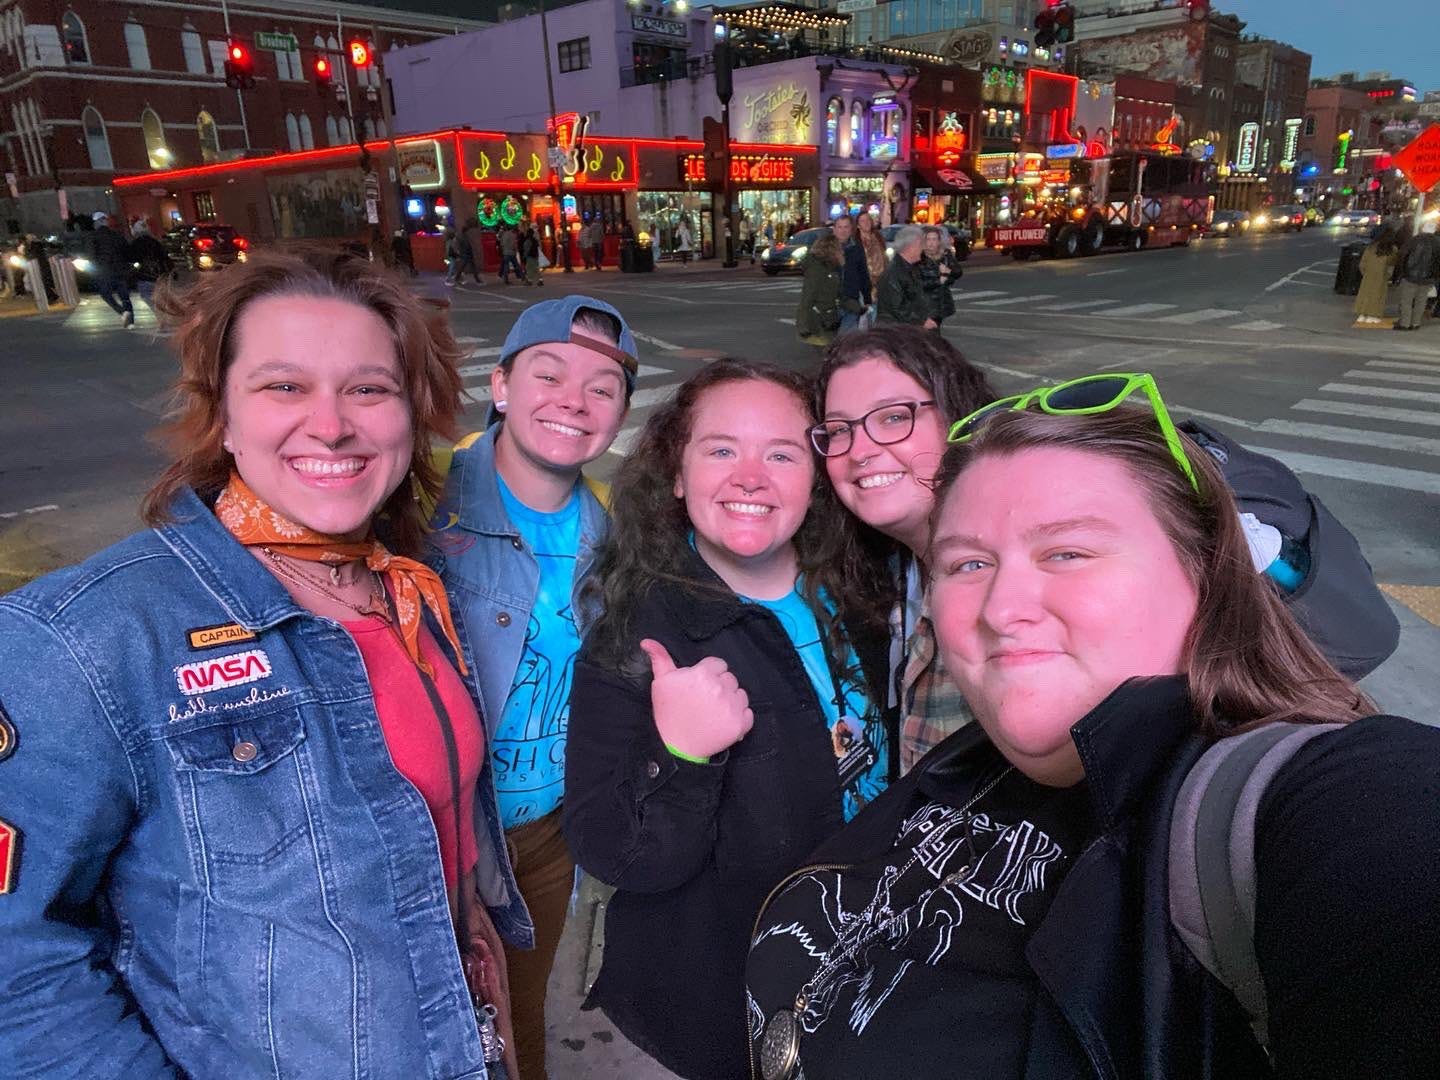 A group of five joyful queer friends smiling on a colorful street in Nashville.